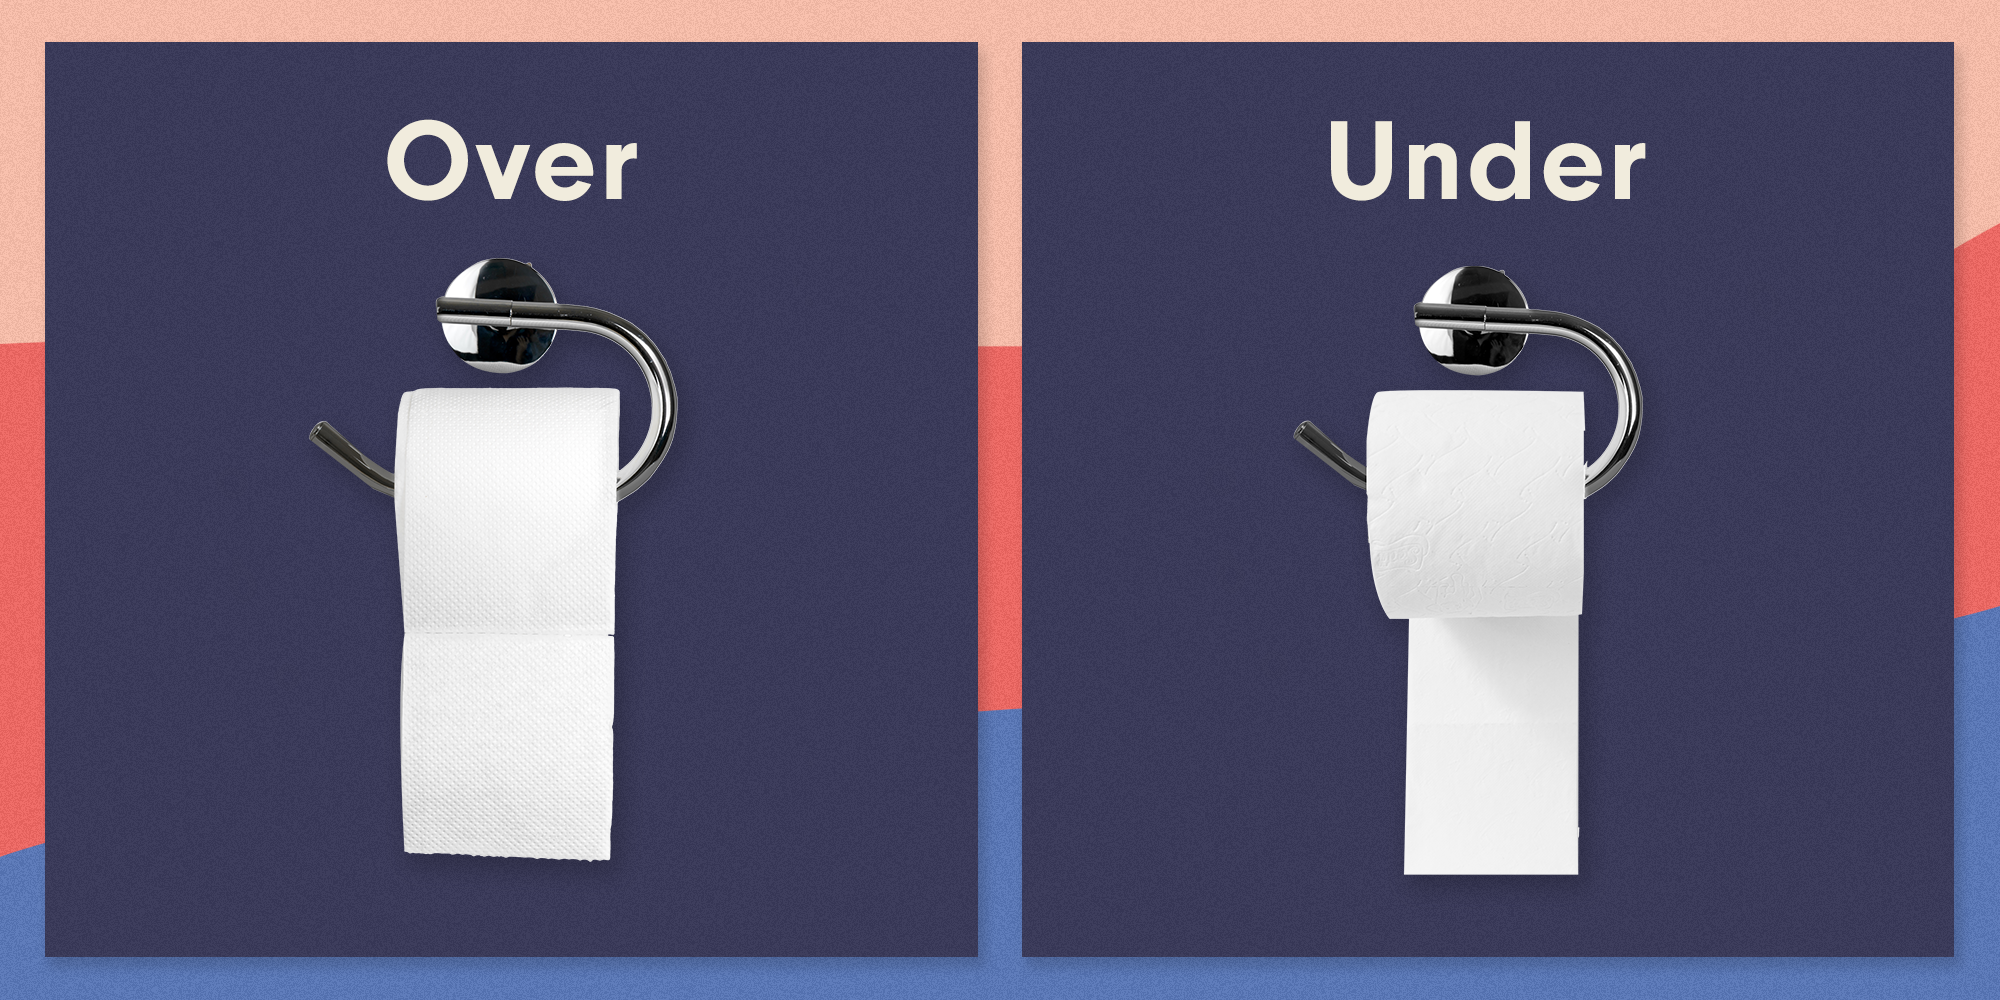 Are You Putting Your Toilet Paper On The Holder Properly?